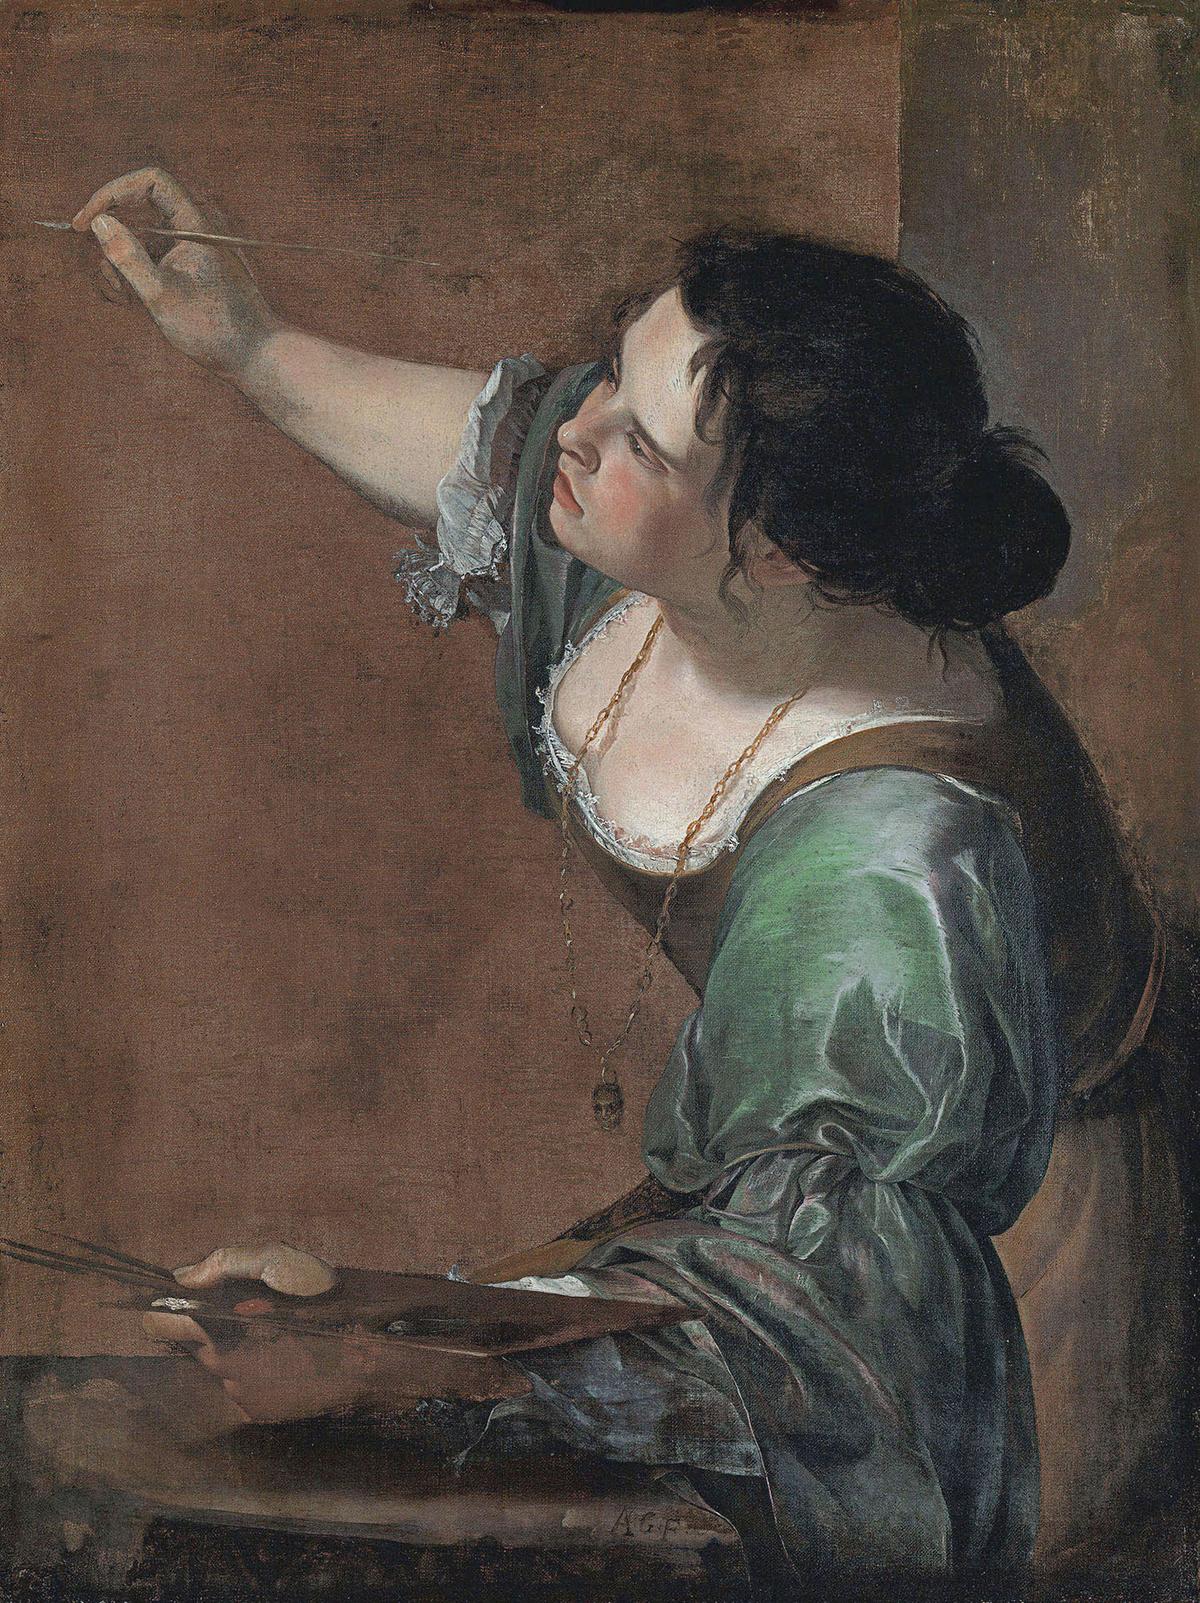 Self-portrait as the "Allegory of Painting," between 1638 and 1639, by Artemisia Gentileschi. Oil on canvas. Royal Collection, UK. (Public Domain)